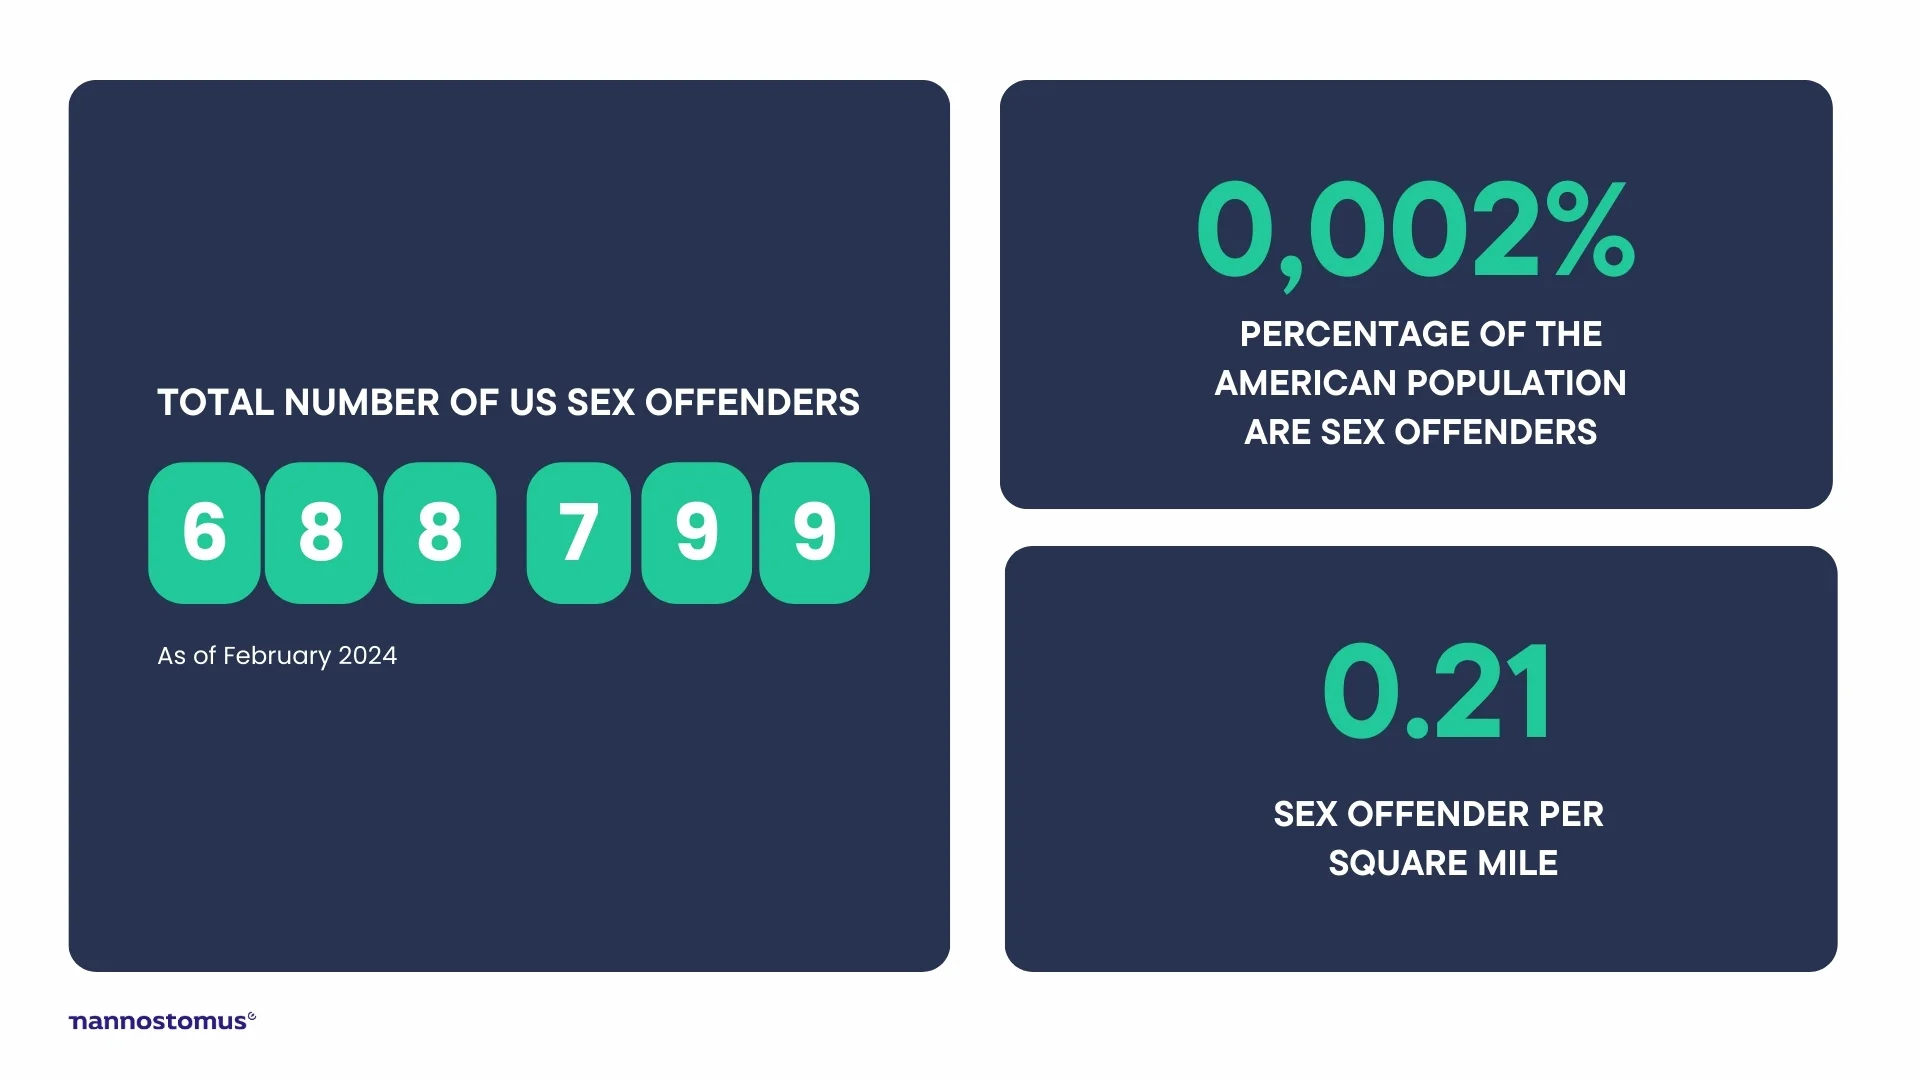 How many registered sex offenders are there in the US